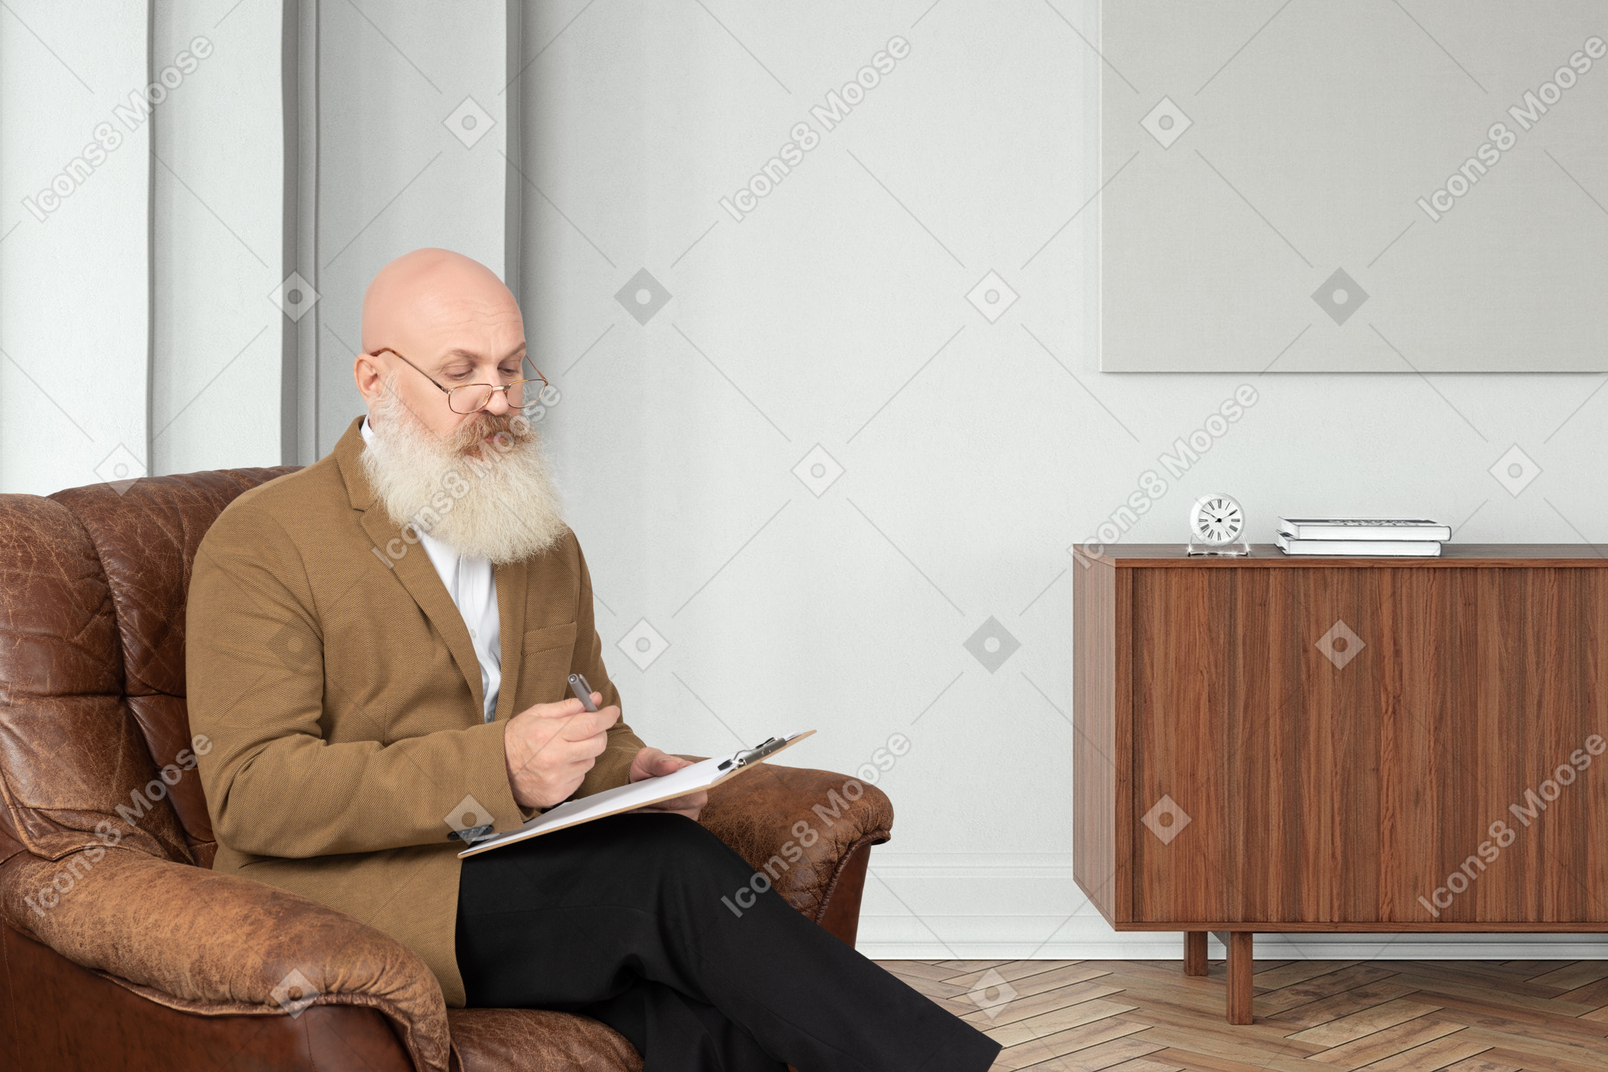 A man sitting on a couch with a laptop